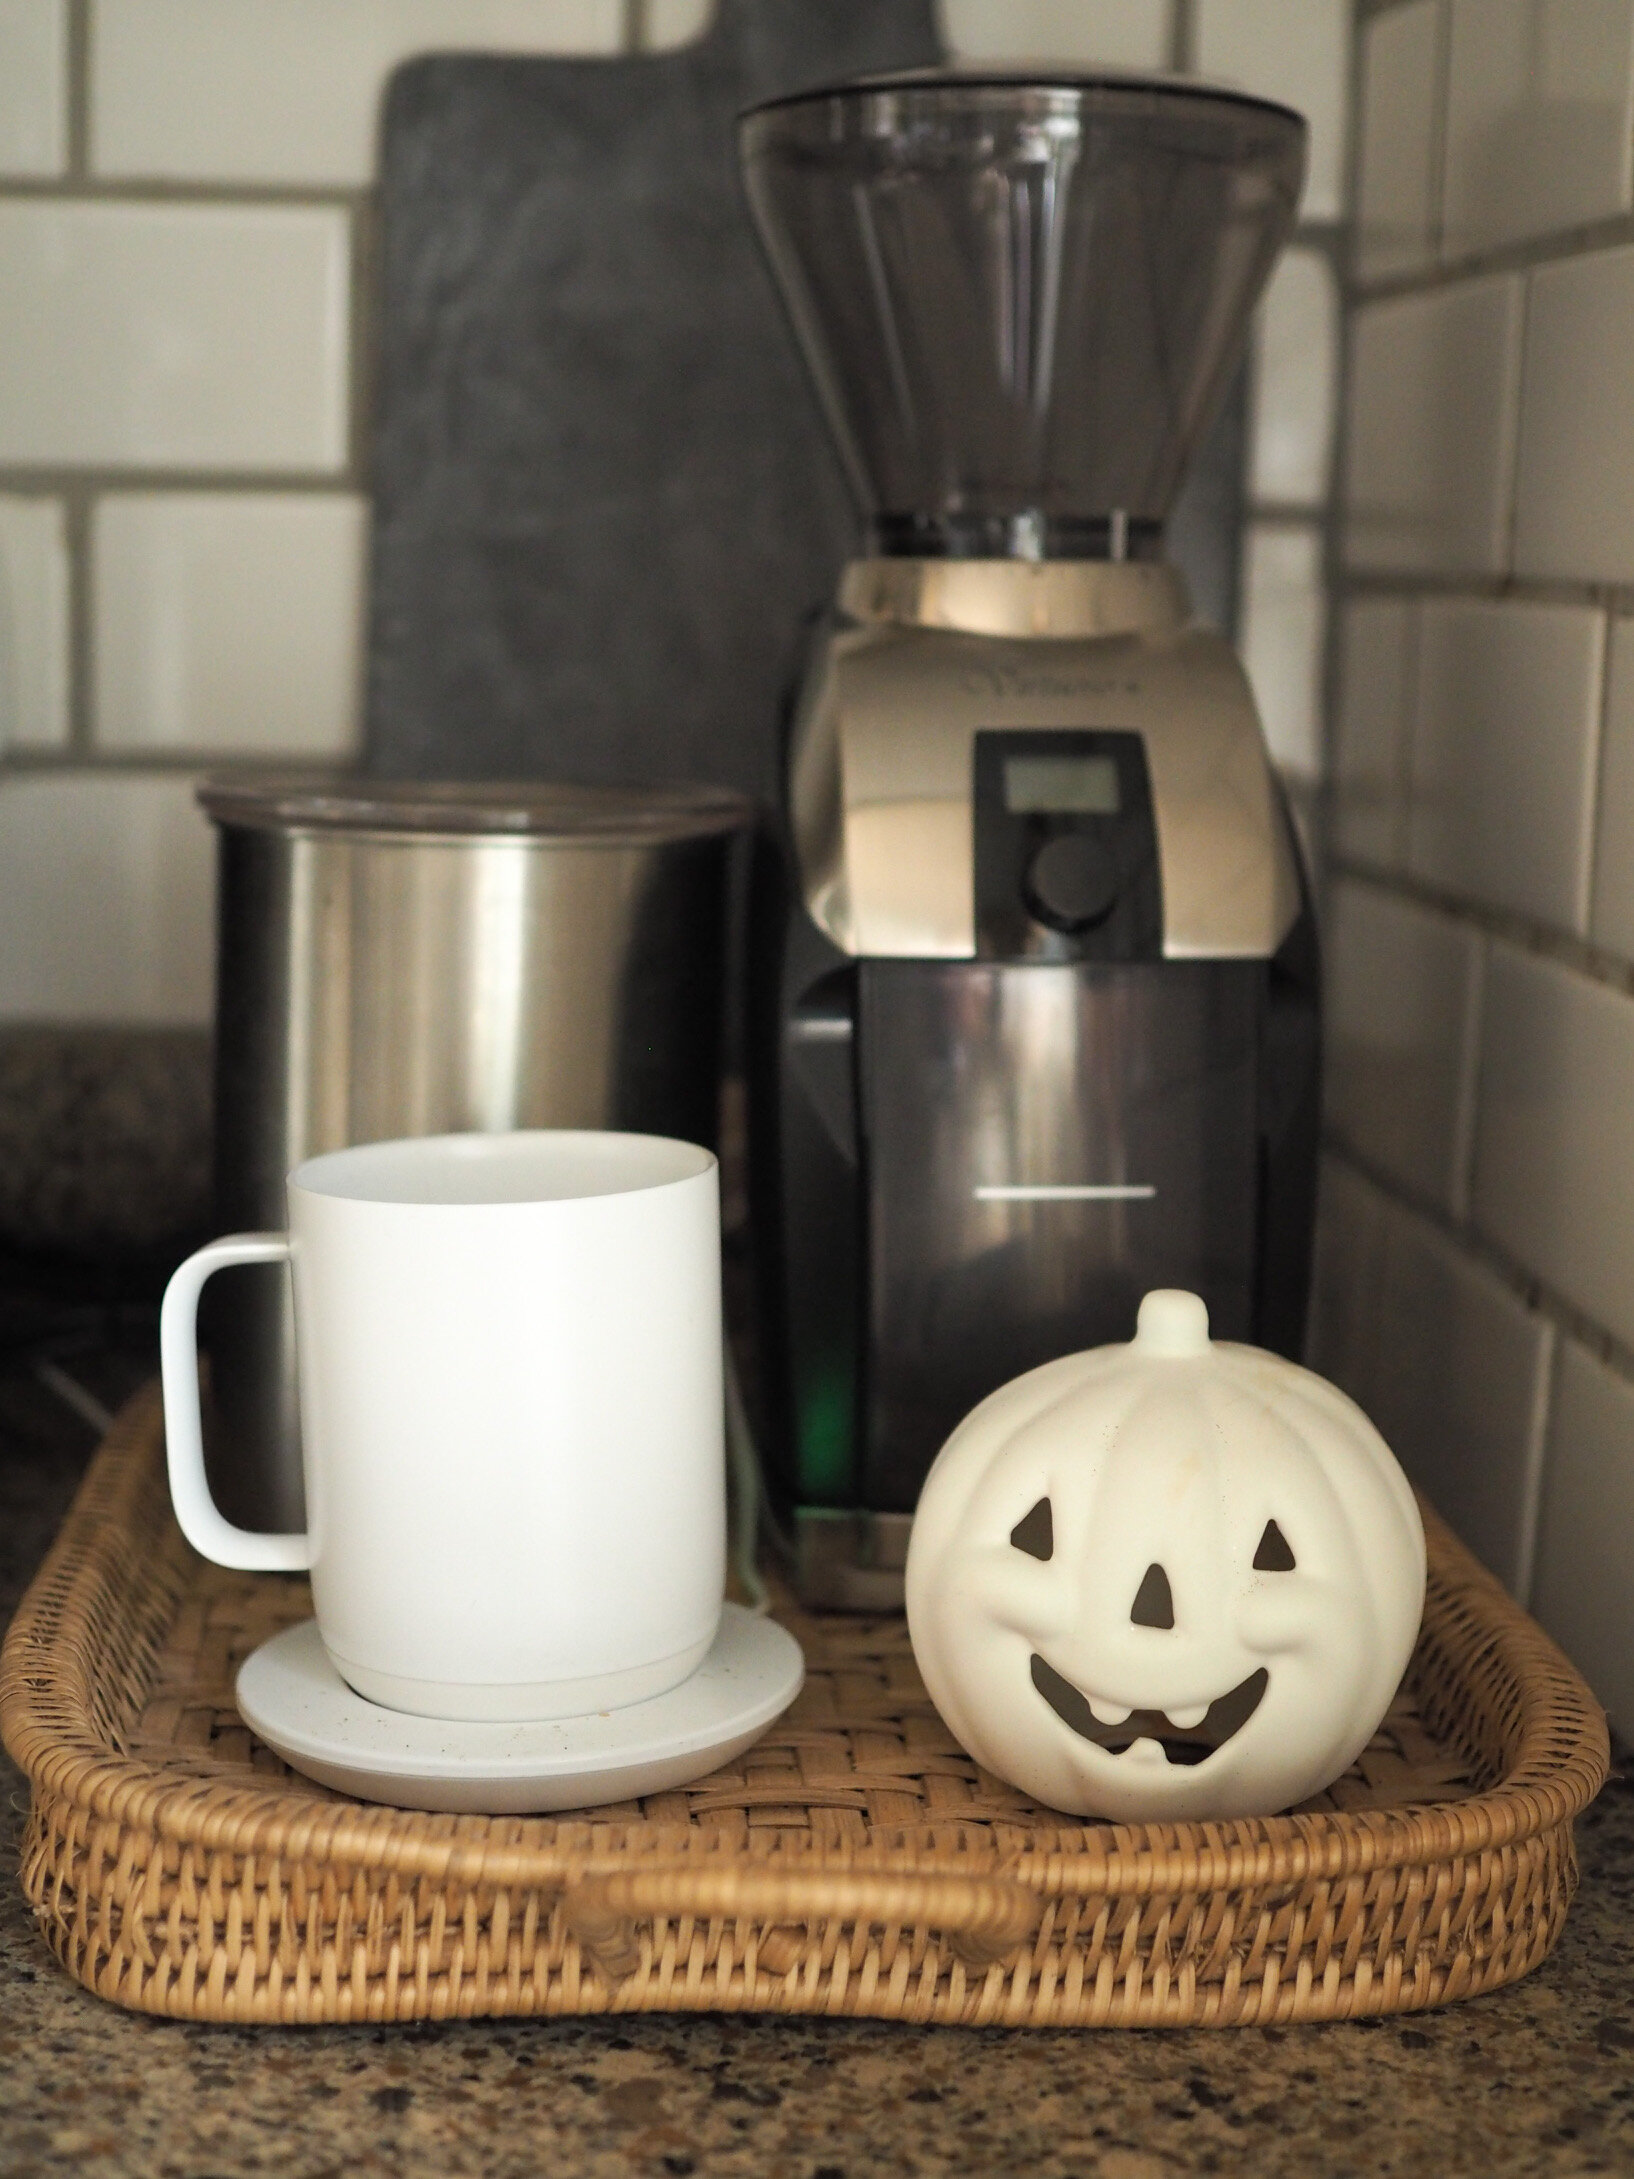 Only good pumpkin vibes at the coffee station